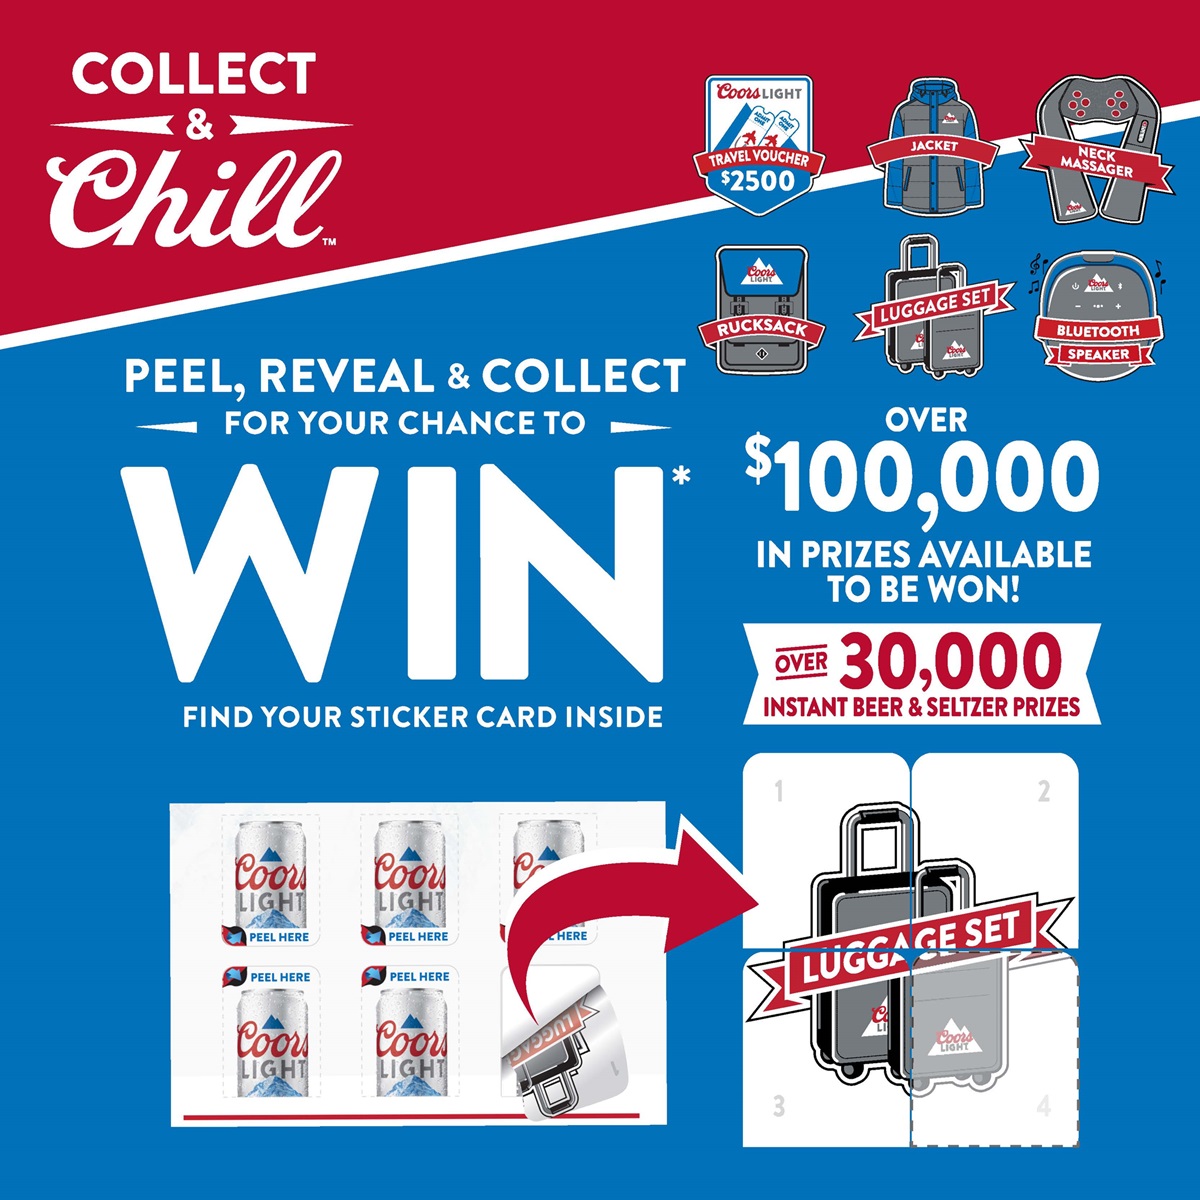 collect & chill | peel, reveal & collect for your chance to win | find your sticker card inside. Over $100,000 in prizes available to be won! Over 30,000 instant beer and seltzer prizes. 